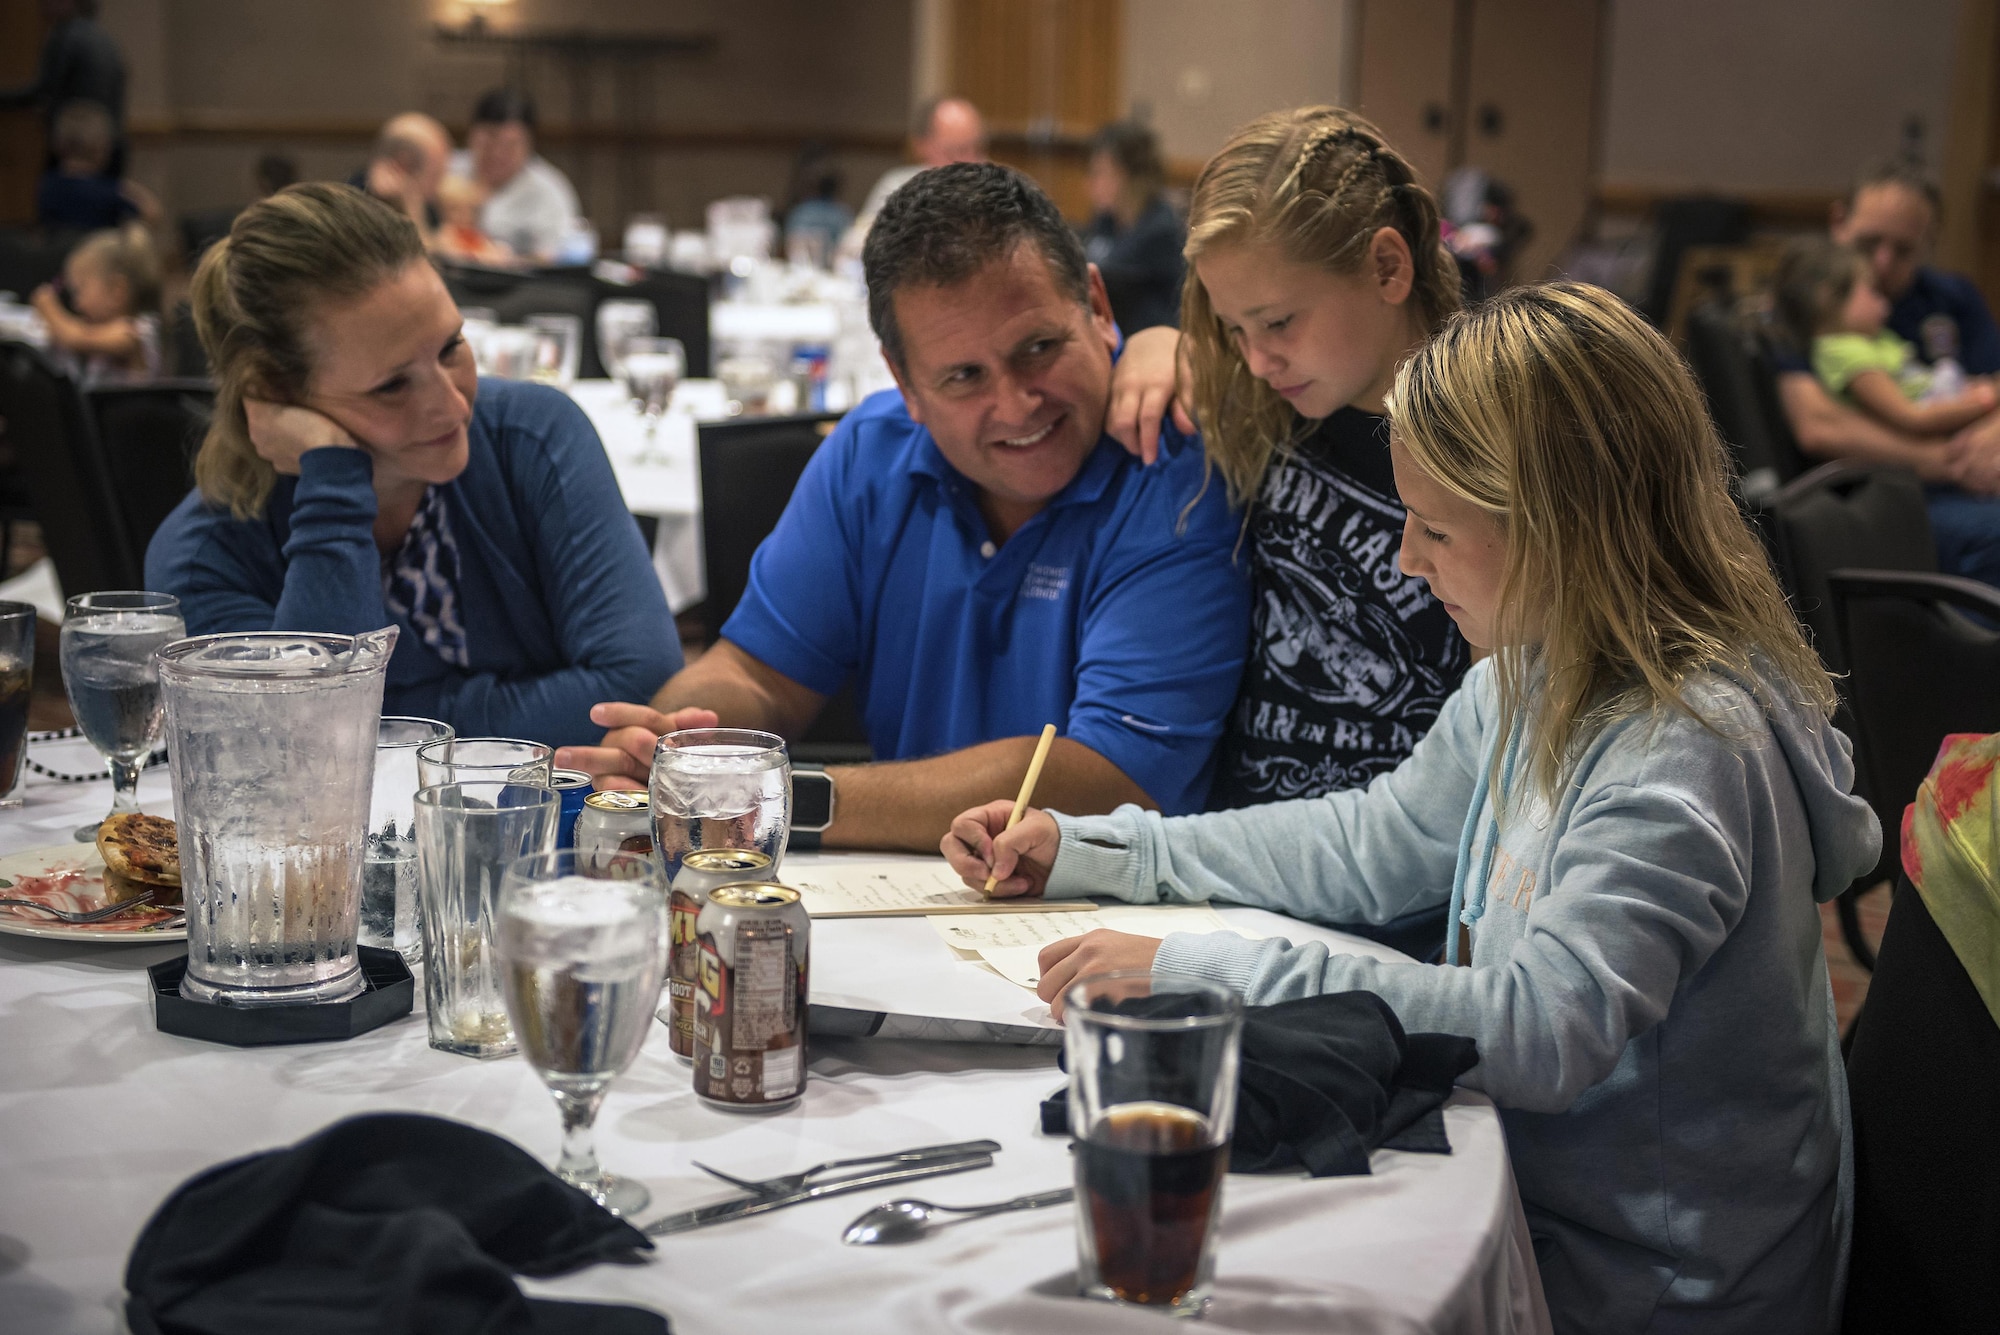 U.S. Air Force Senior Master Sgt. Peter Schussler, the quality assurance chief inspector with the 182nd Maintenance Group, Illinois Air National Guard, and his family work on creating a family mission statement in Lake Geneva, Wis., Aug. 25, 2017. Fourteen Illinois Air National Guard families participated in a chaplain-led Strong Bonds weekend retreat to learn how to strengthen family relationships through the “The 7 Habits of Highly Effective Families” curriculum. (U.S. Air National Guard photo by Tech. Sgt. Lealan Buehrer)